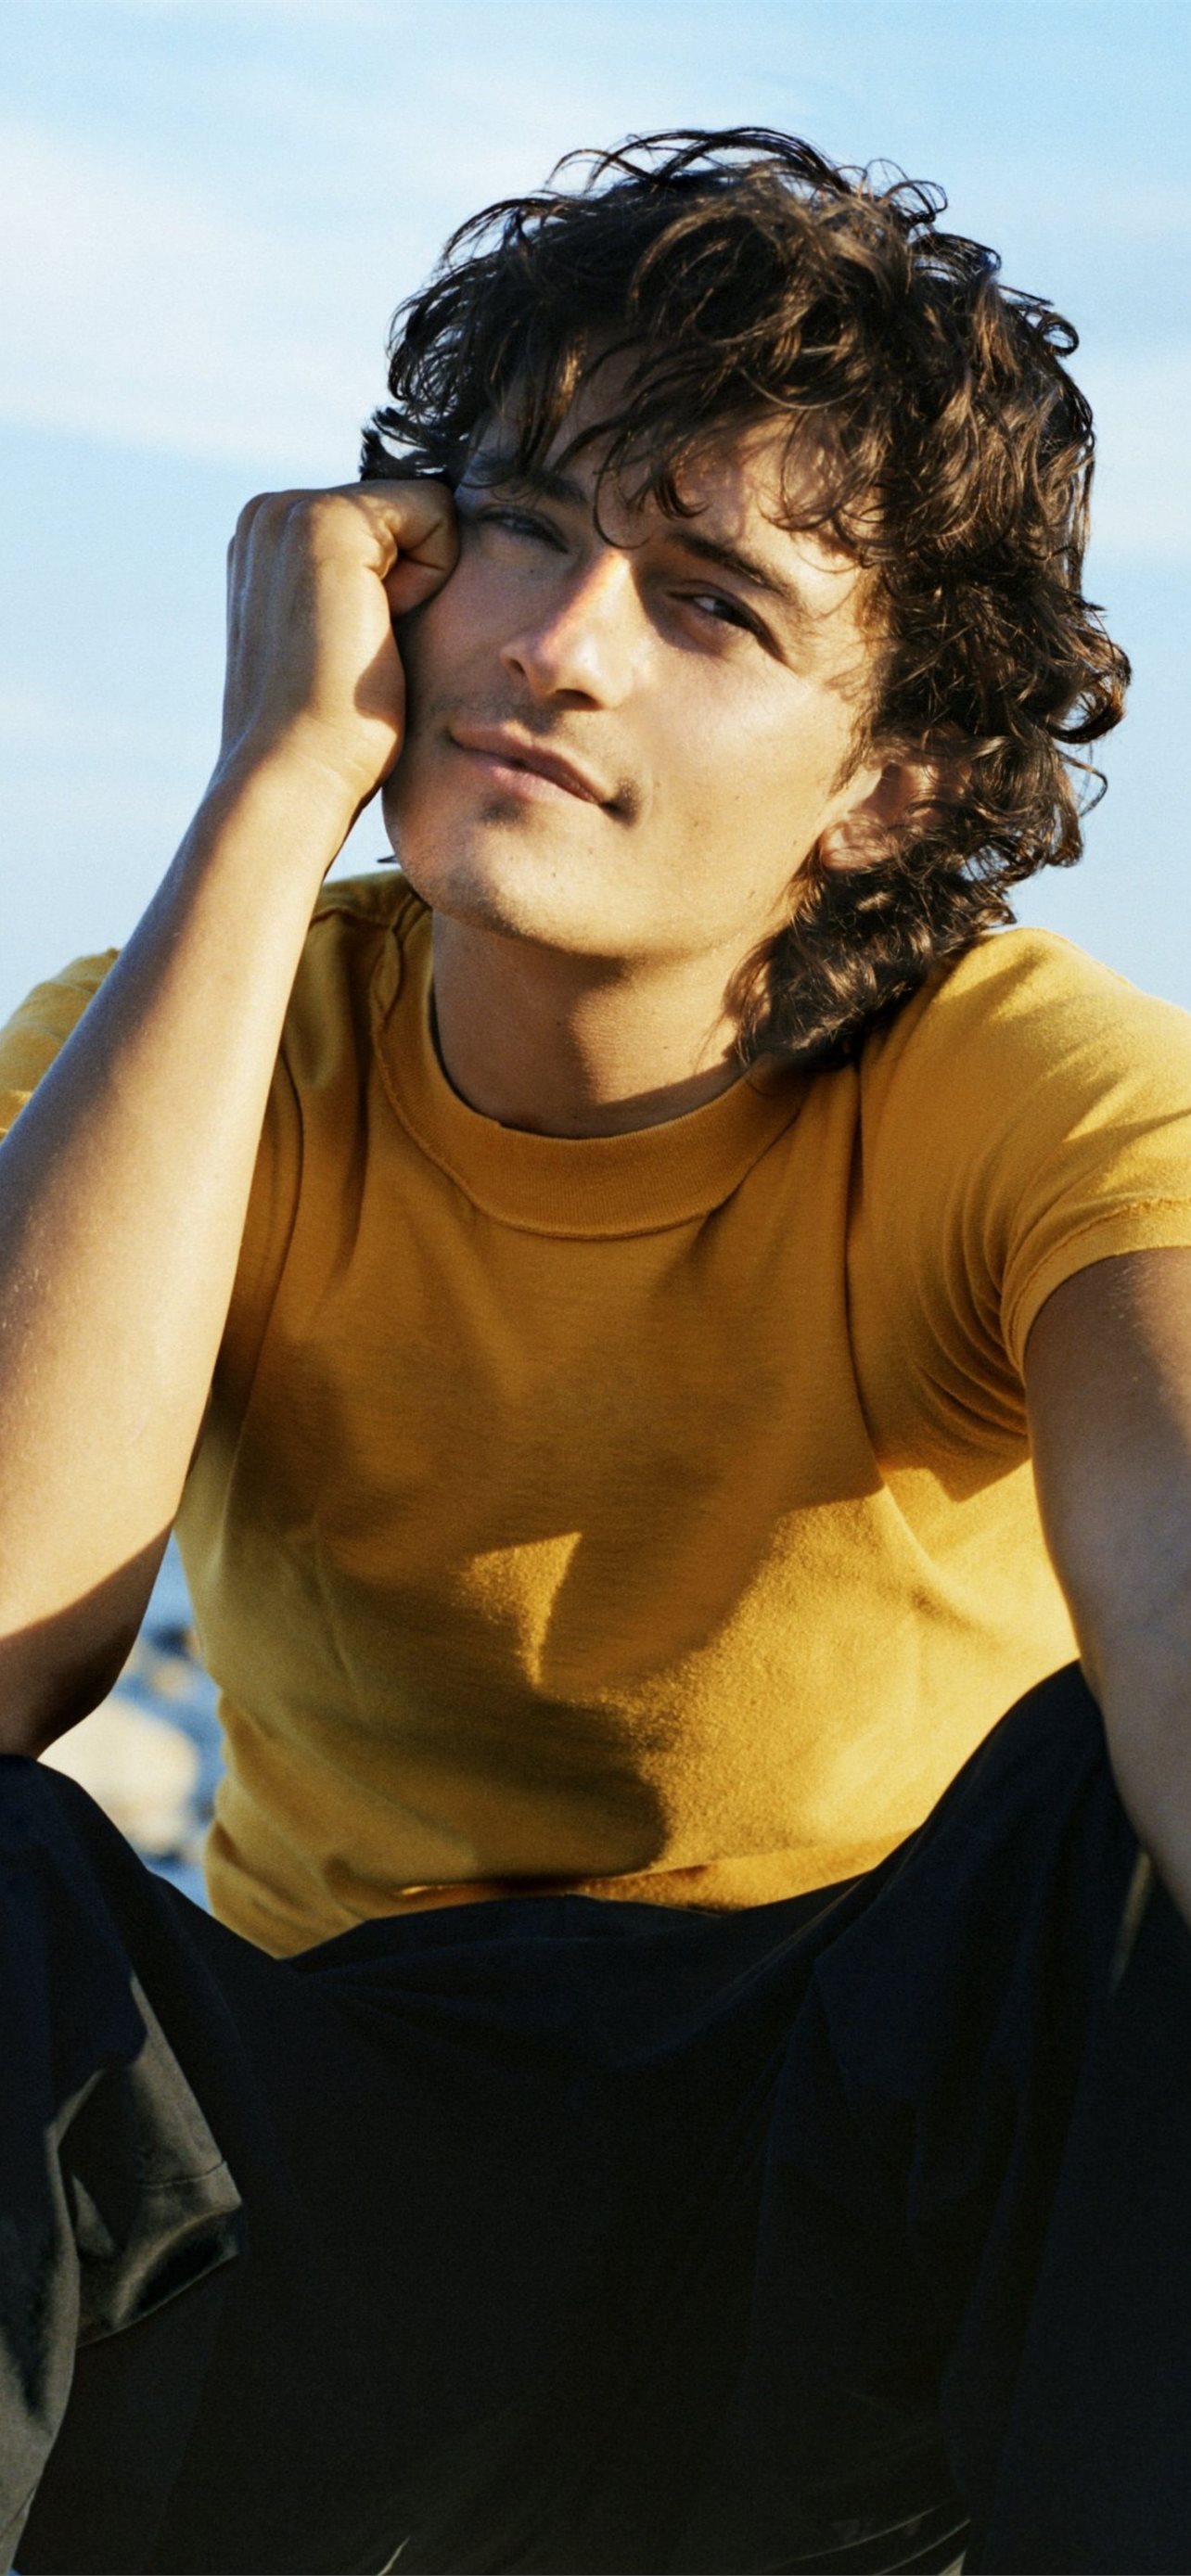 orlando bloom iPhone Wallpapers Free Download